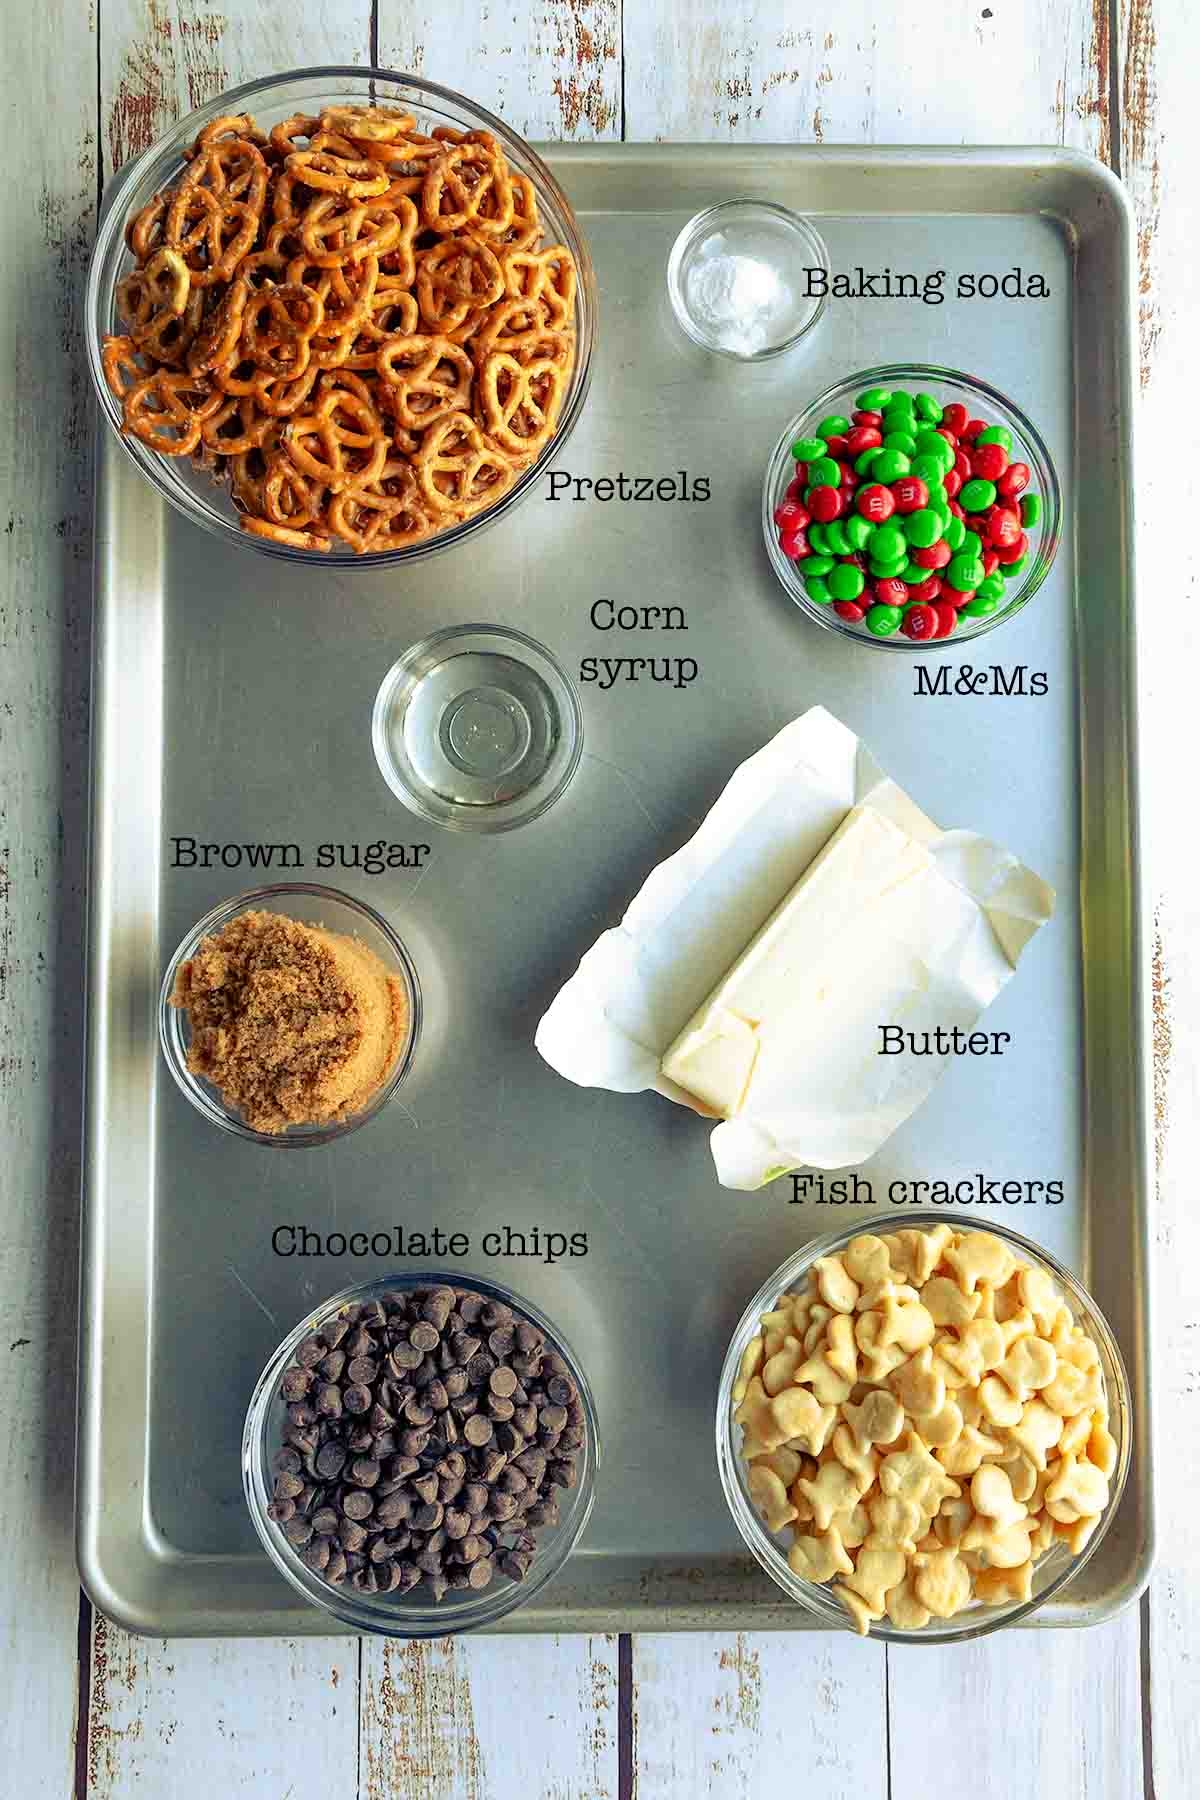 Ingredients for butter toffee trail mix--pretzels, baking soda, M&Ms, corn syrup, brown sugar, butter, chocolate chips, and fish crackers.